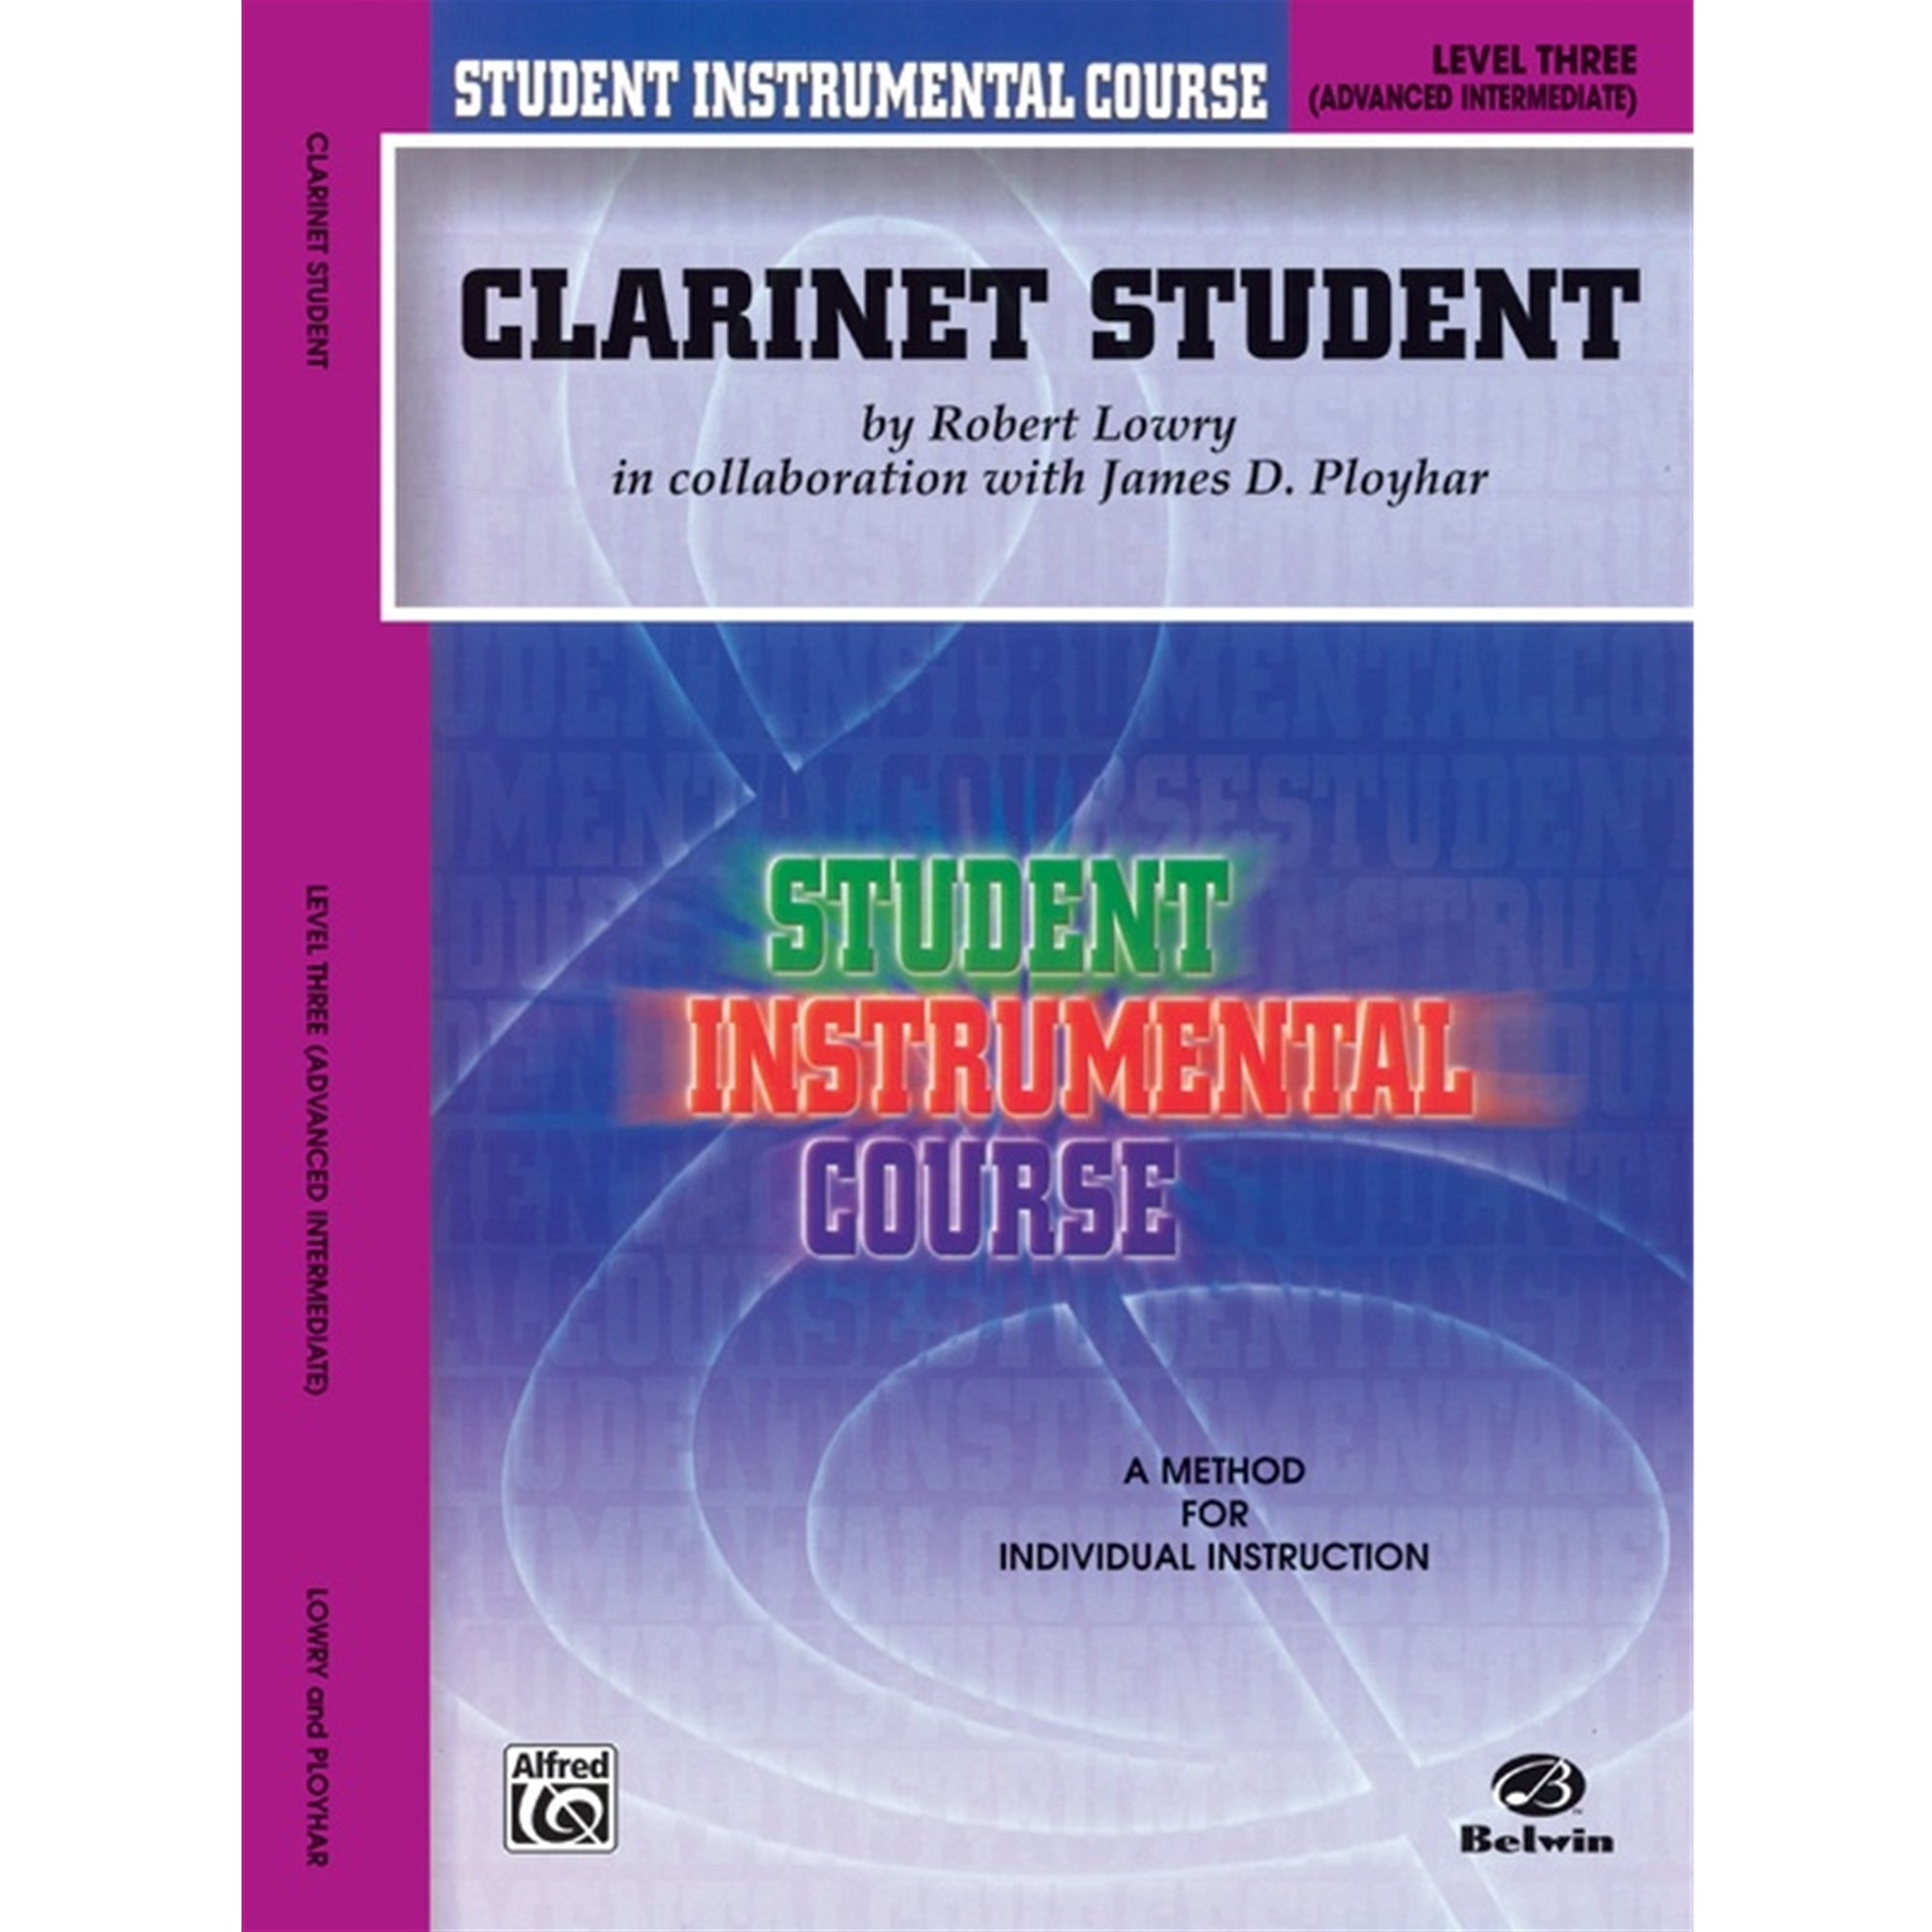 ALFRED 00BIC00306A Student Instrumental Course: Clarinet Student, Level III [Clarinet]